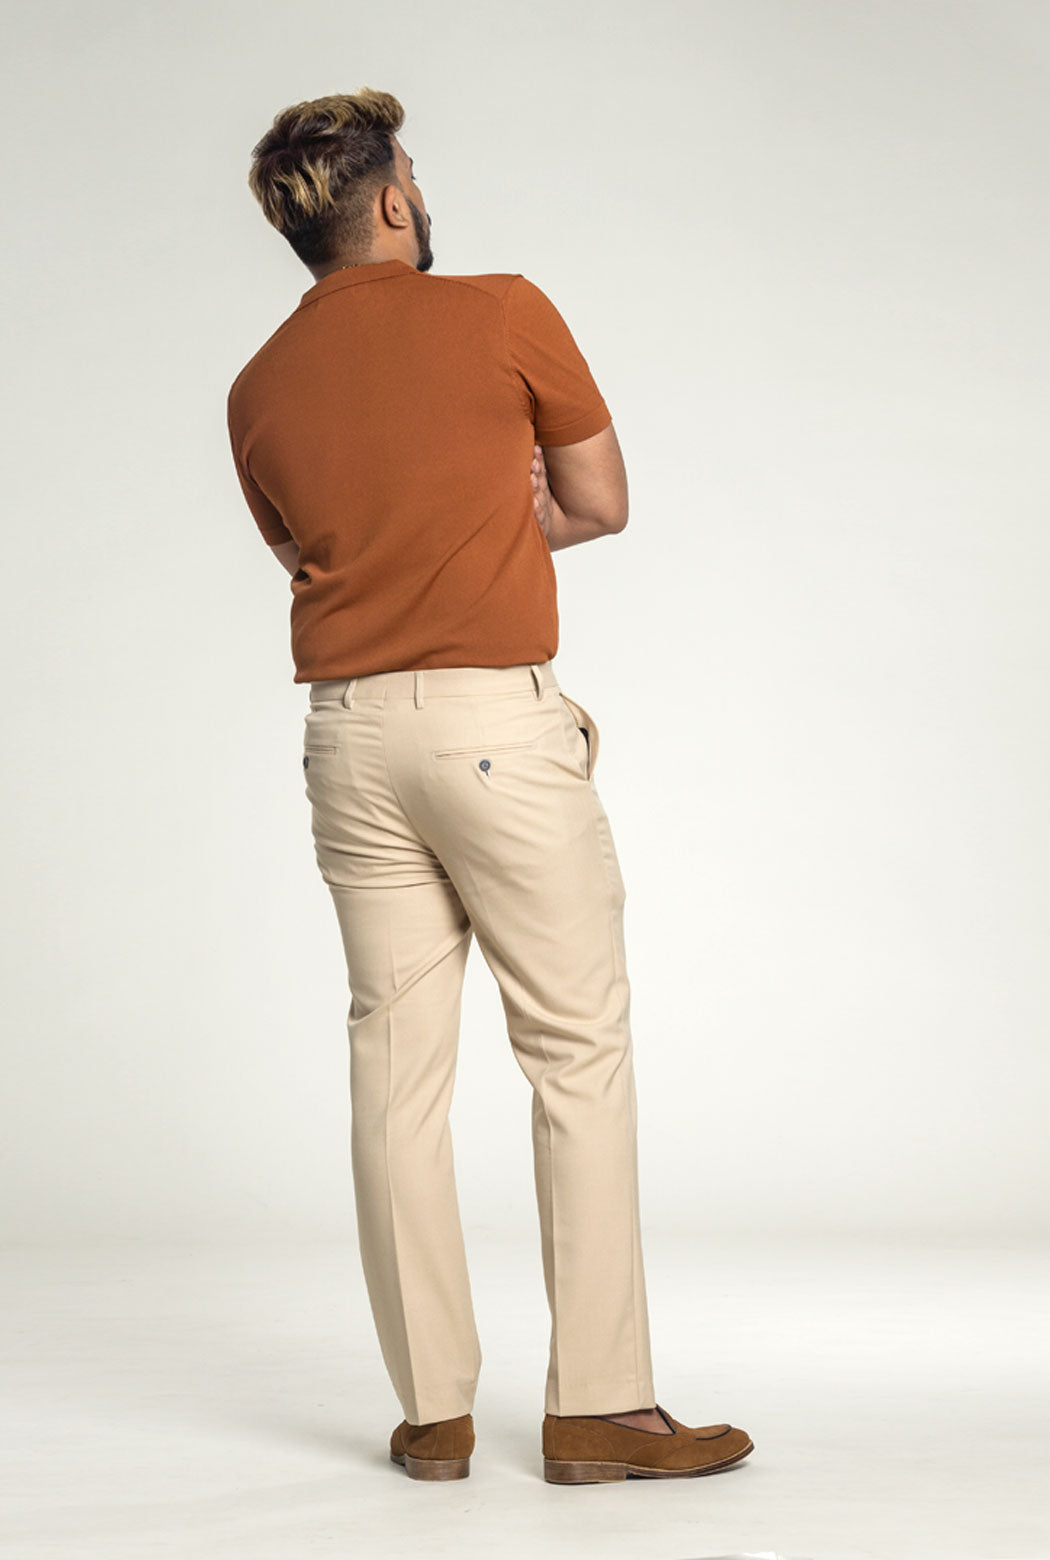 Knit  Polo Tee - Cinnamon Brown Open Collar - Zeve Shoes